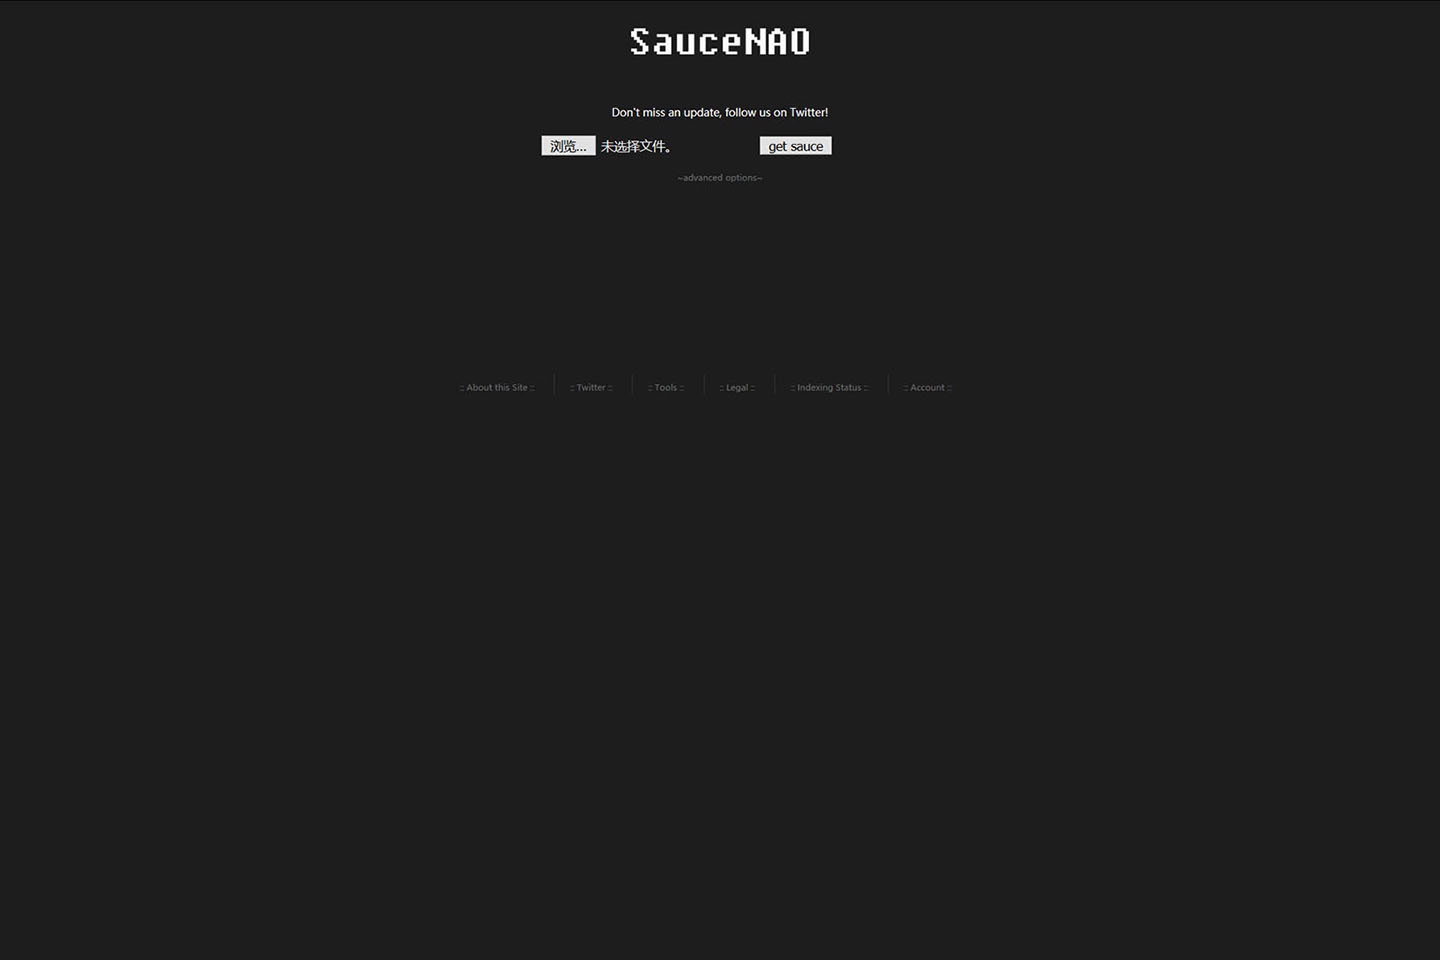 2016-saucenao-image-search